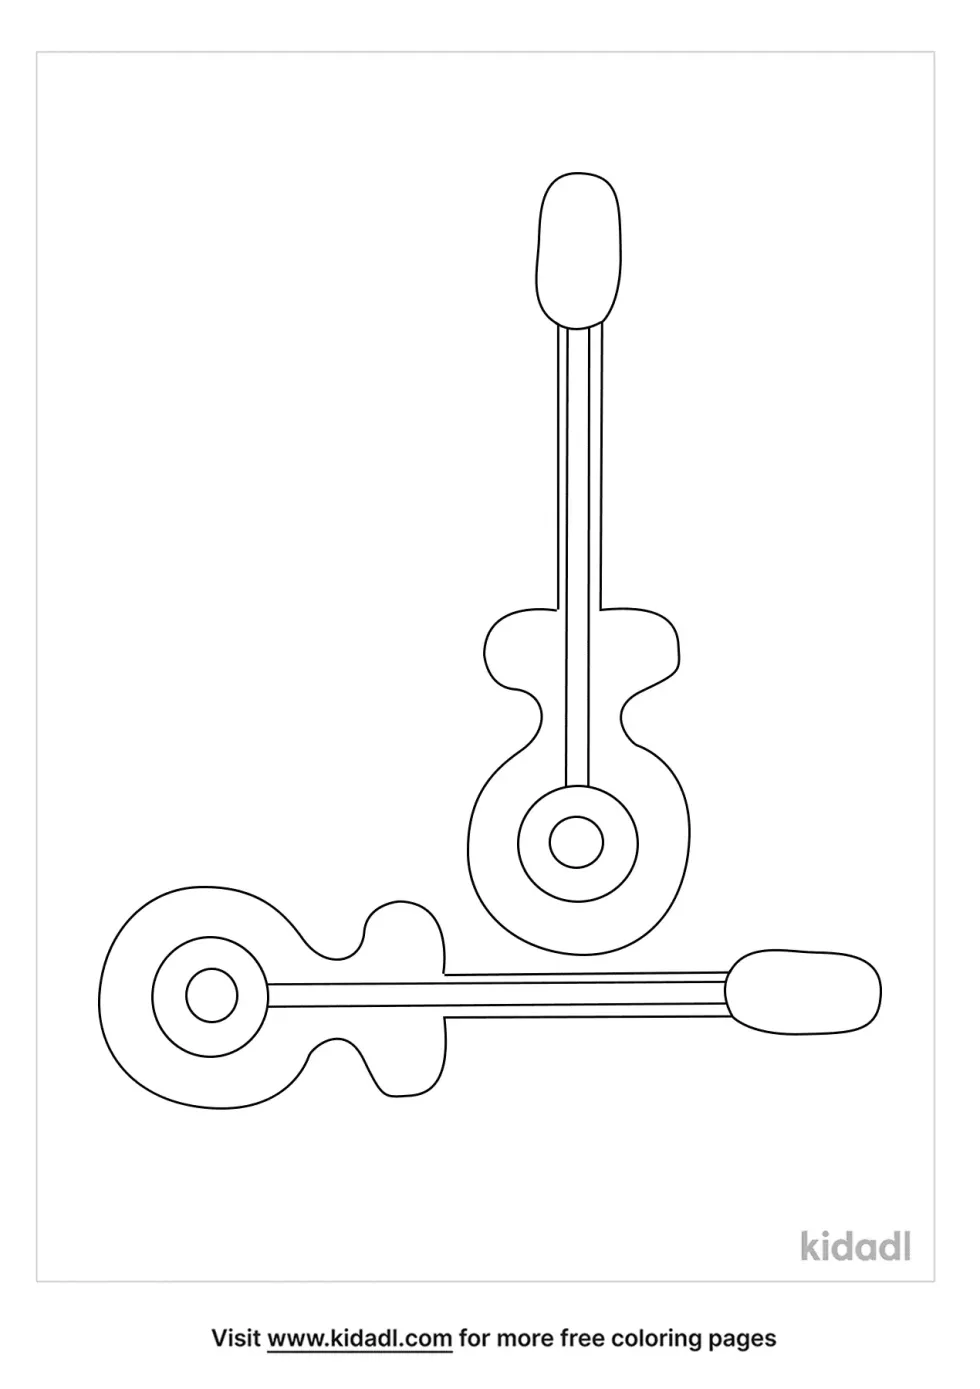 A coloring image of an abstract musical instrument